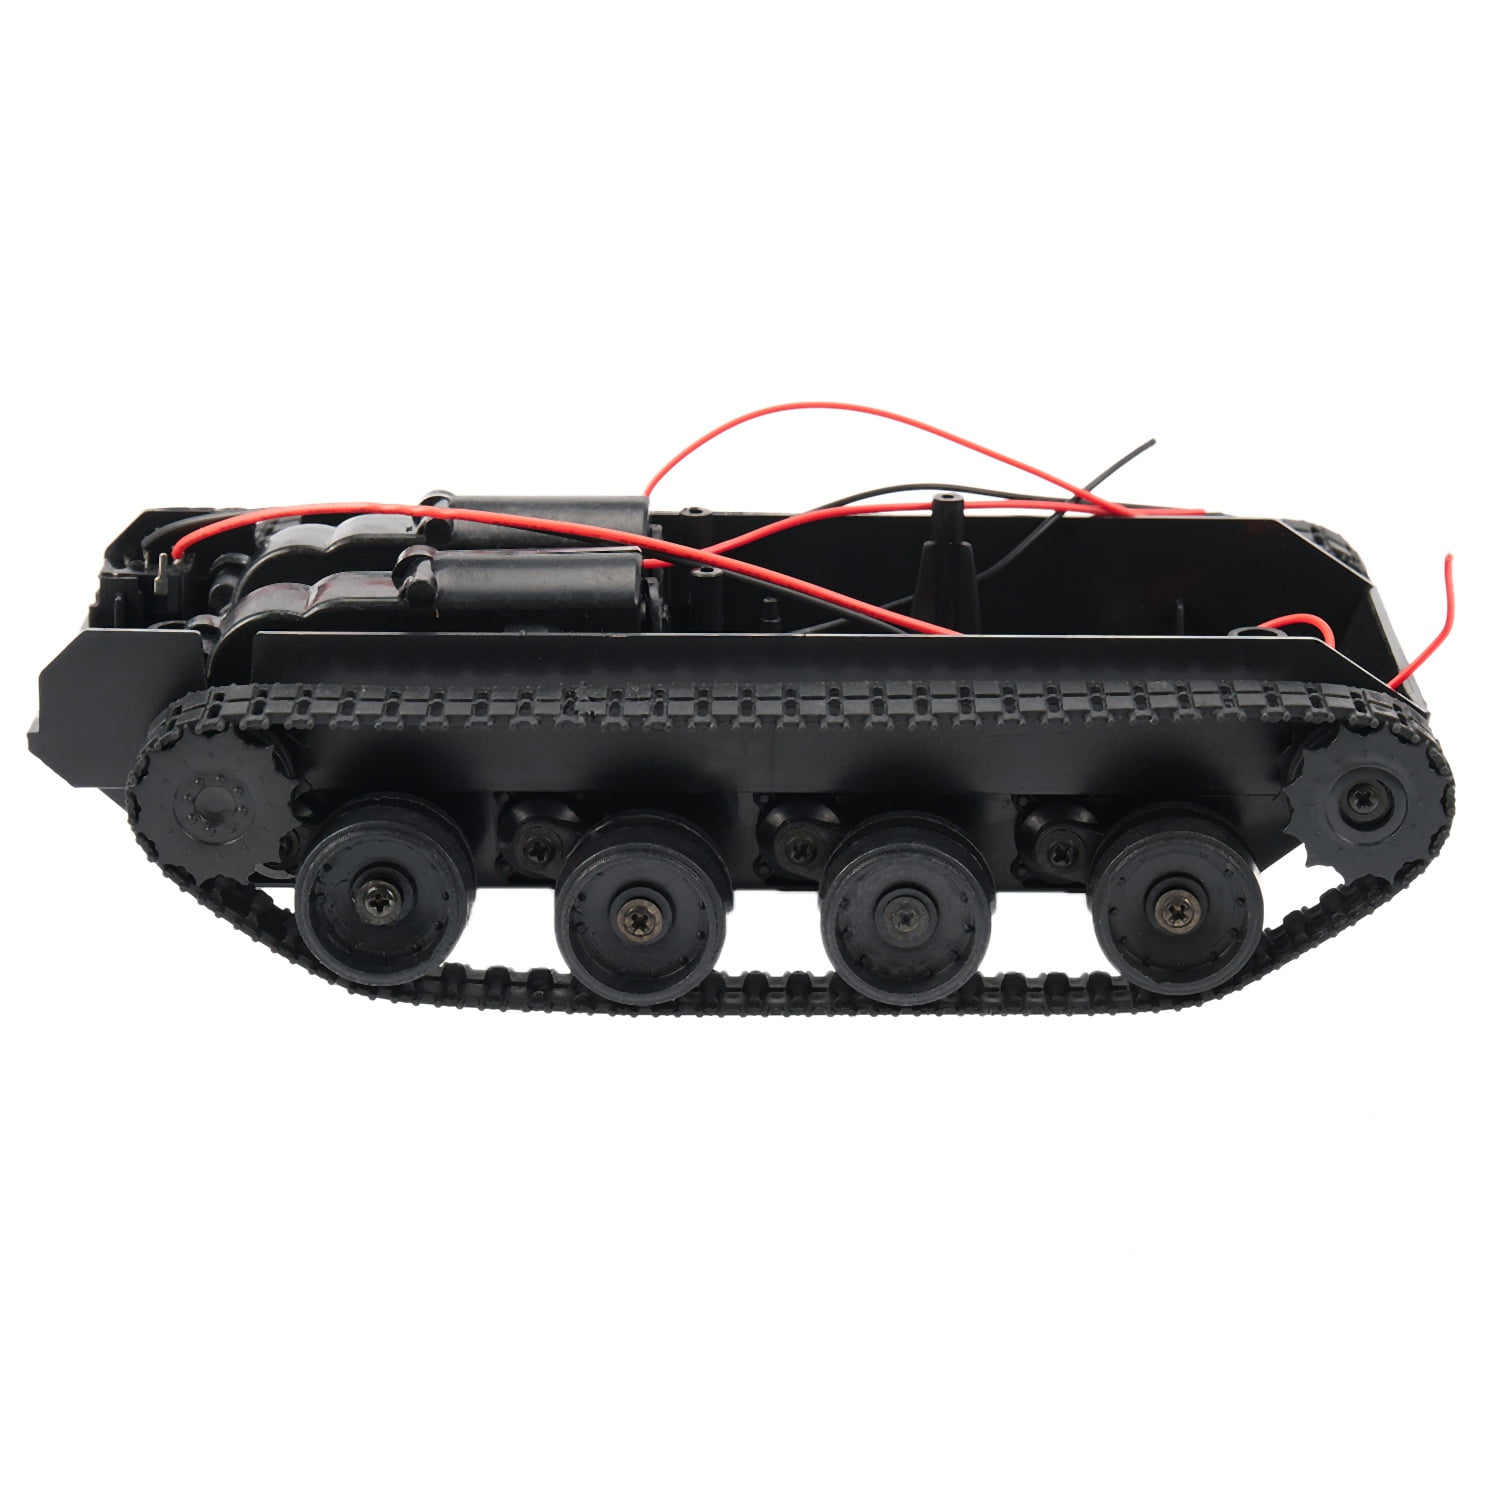 Rc Tank Smart Robot Tank Car Chassis Kit Rubber Track Crawler For Arduino 130 